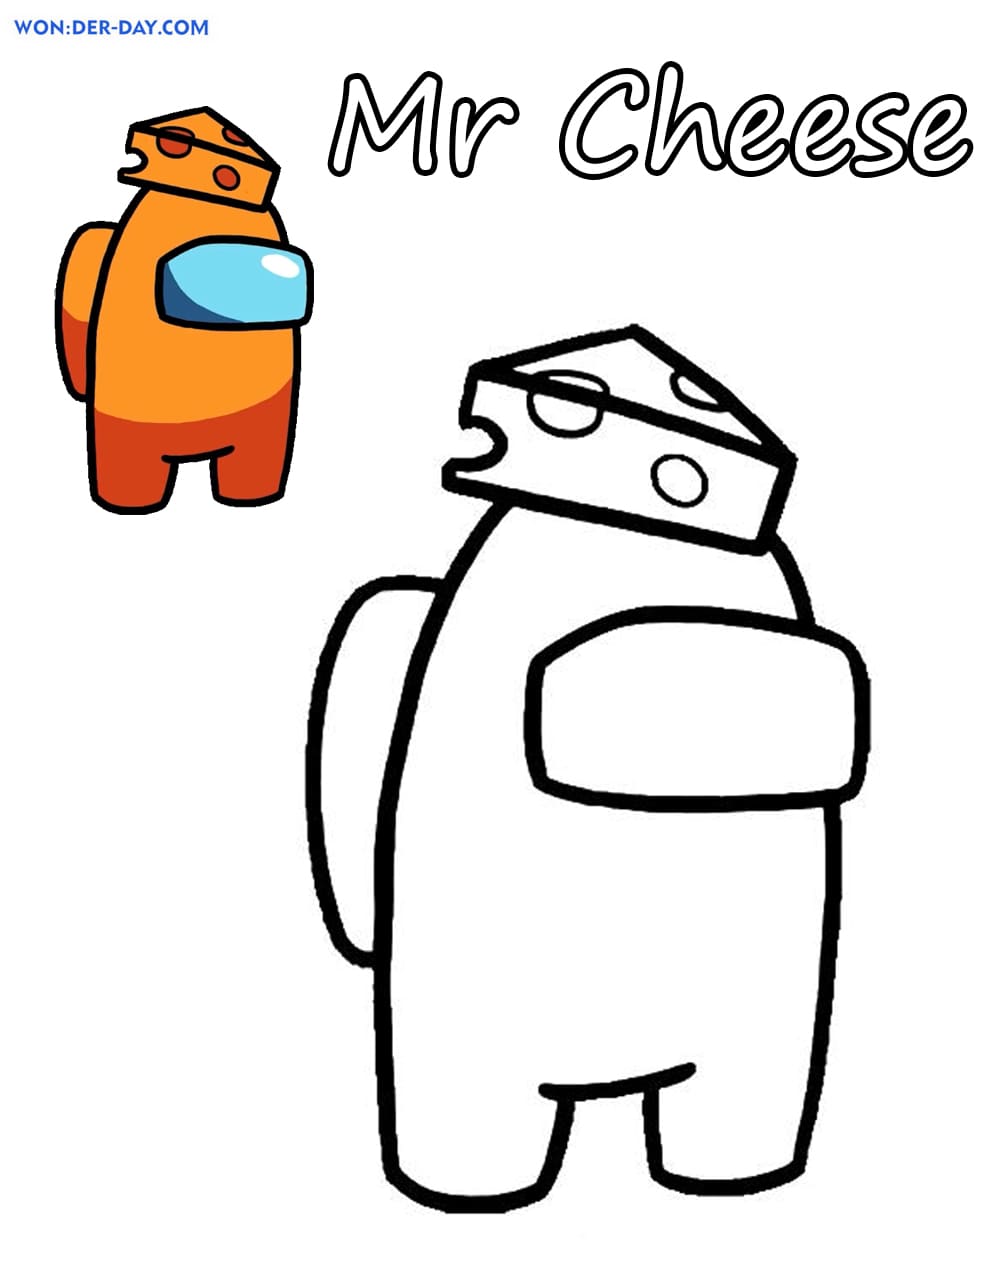 Mr. Cheese coloring pages   Printable coloring pages